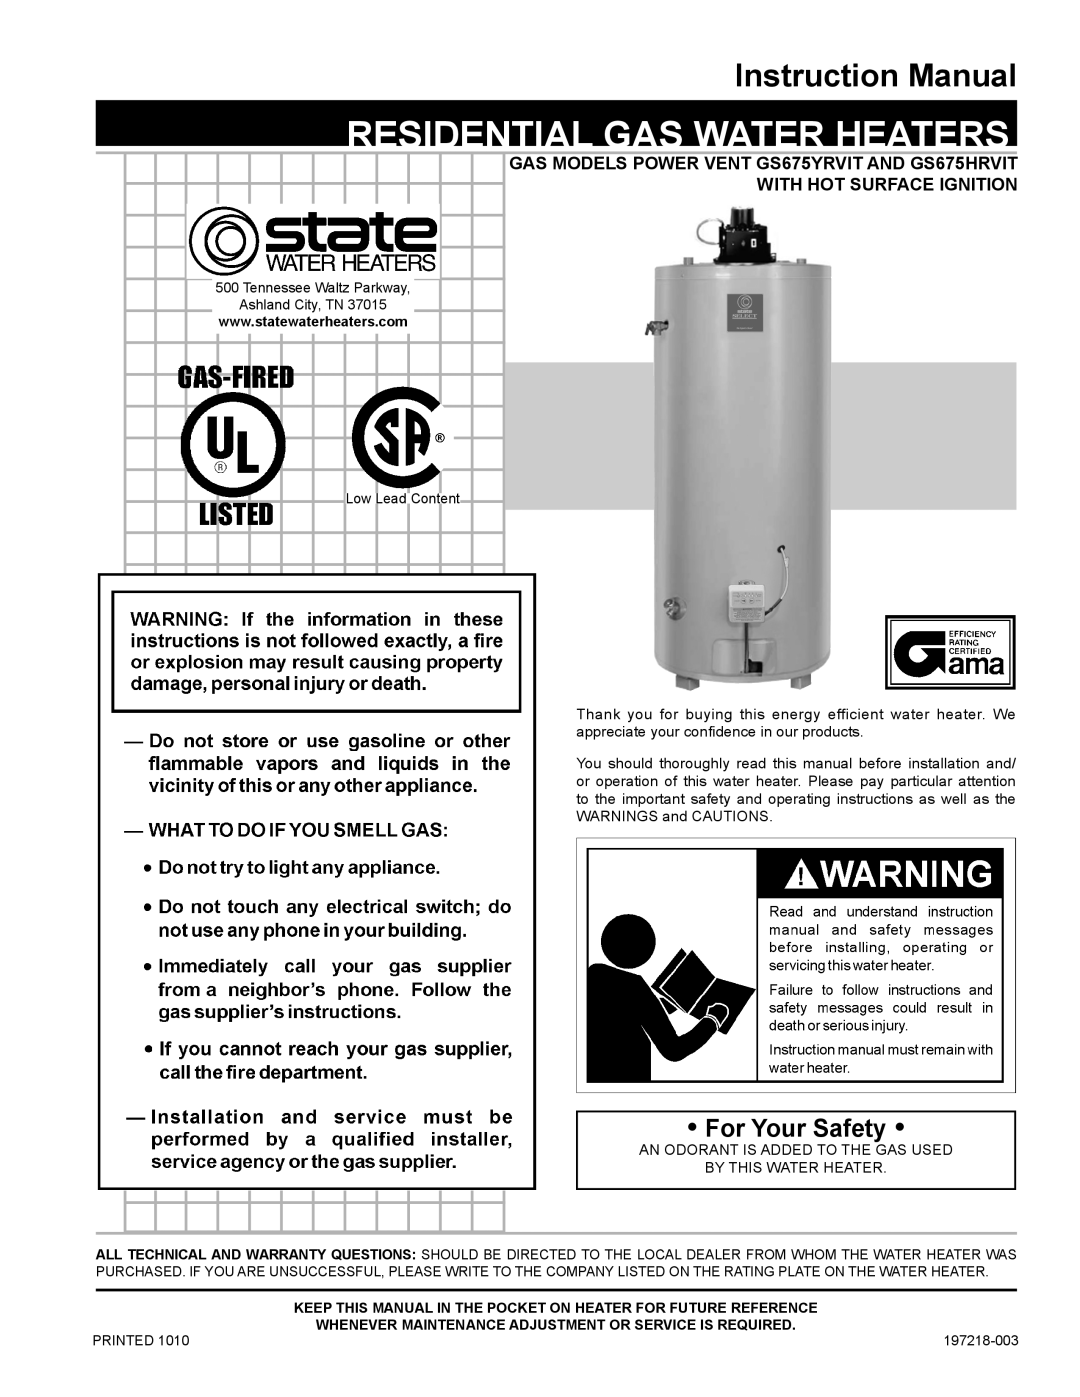 State Industries GS675HRVIT instruction manual Instruction Manual, Residential Gas Water Heaters, For Your Safety, Printed 